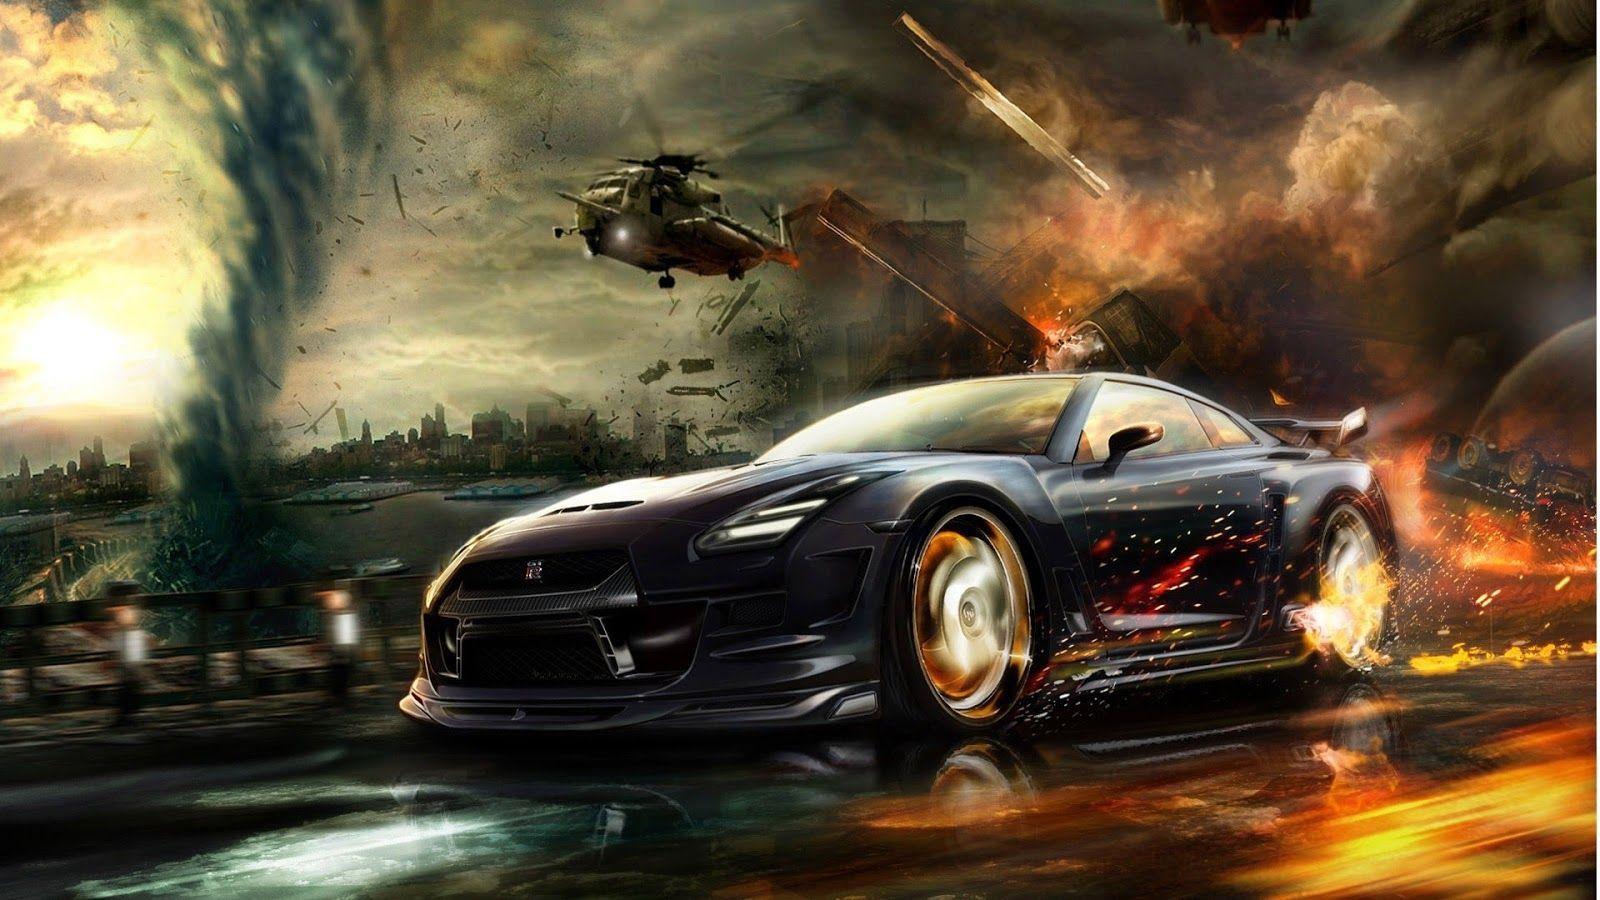 Cool Car Wallpaper, Cool Car Background for PC Ultra HD